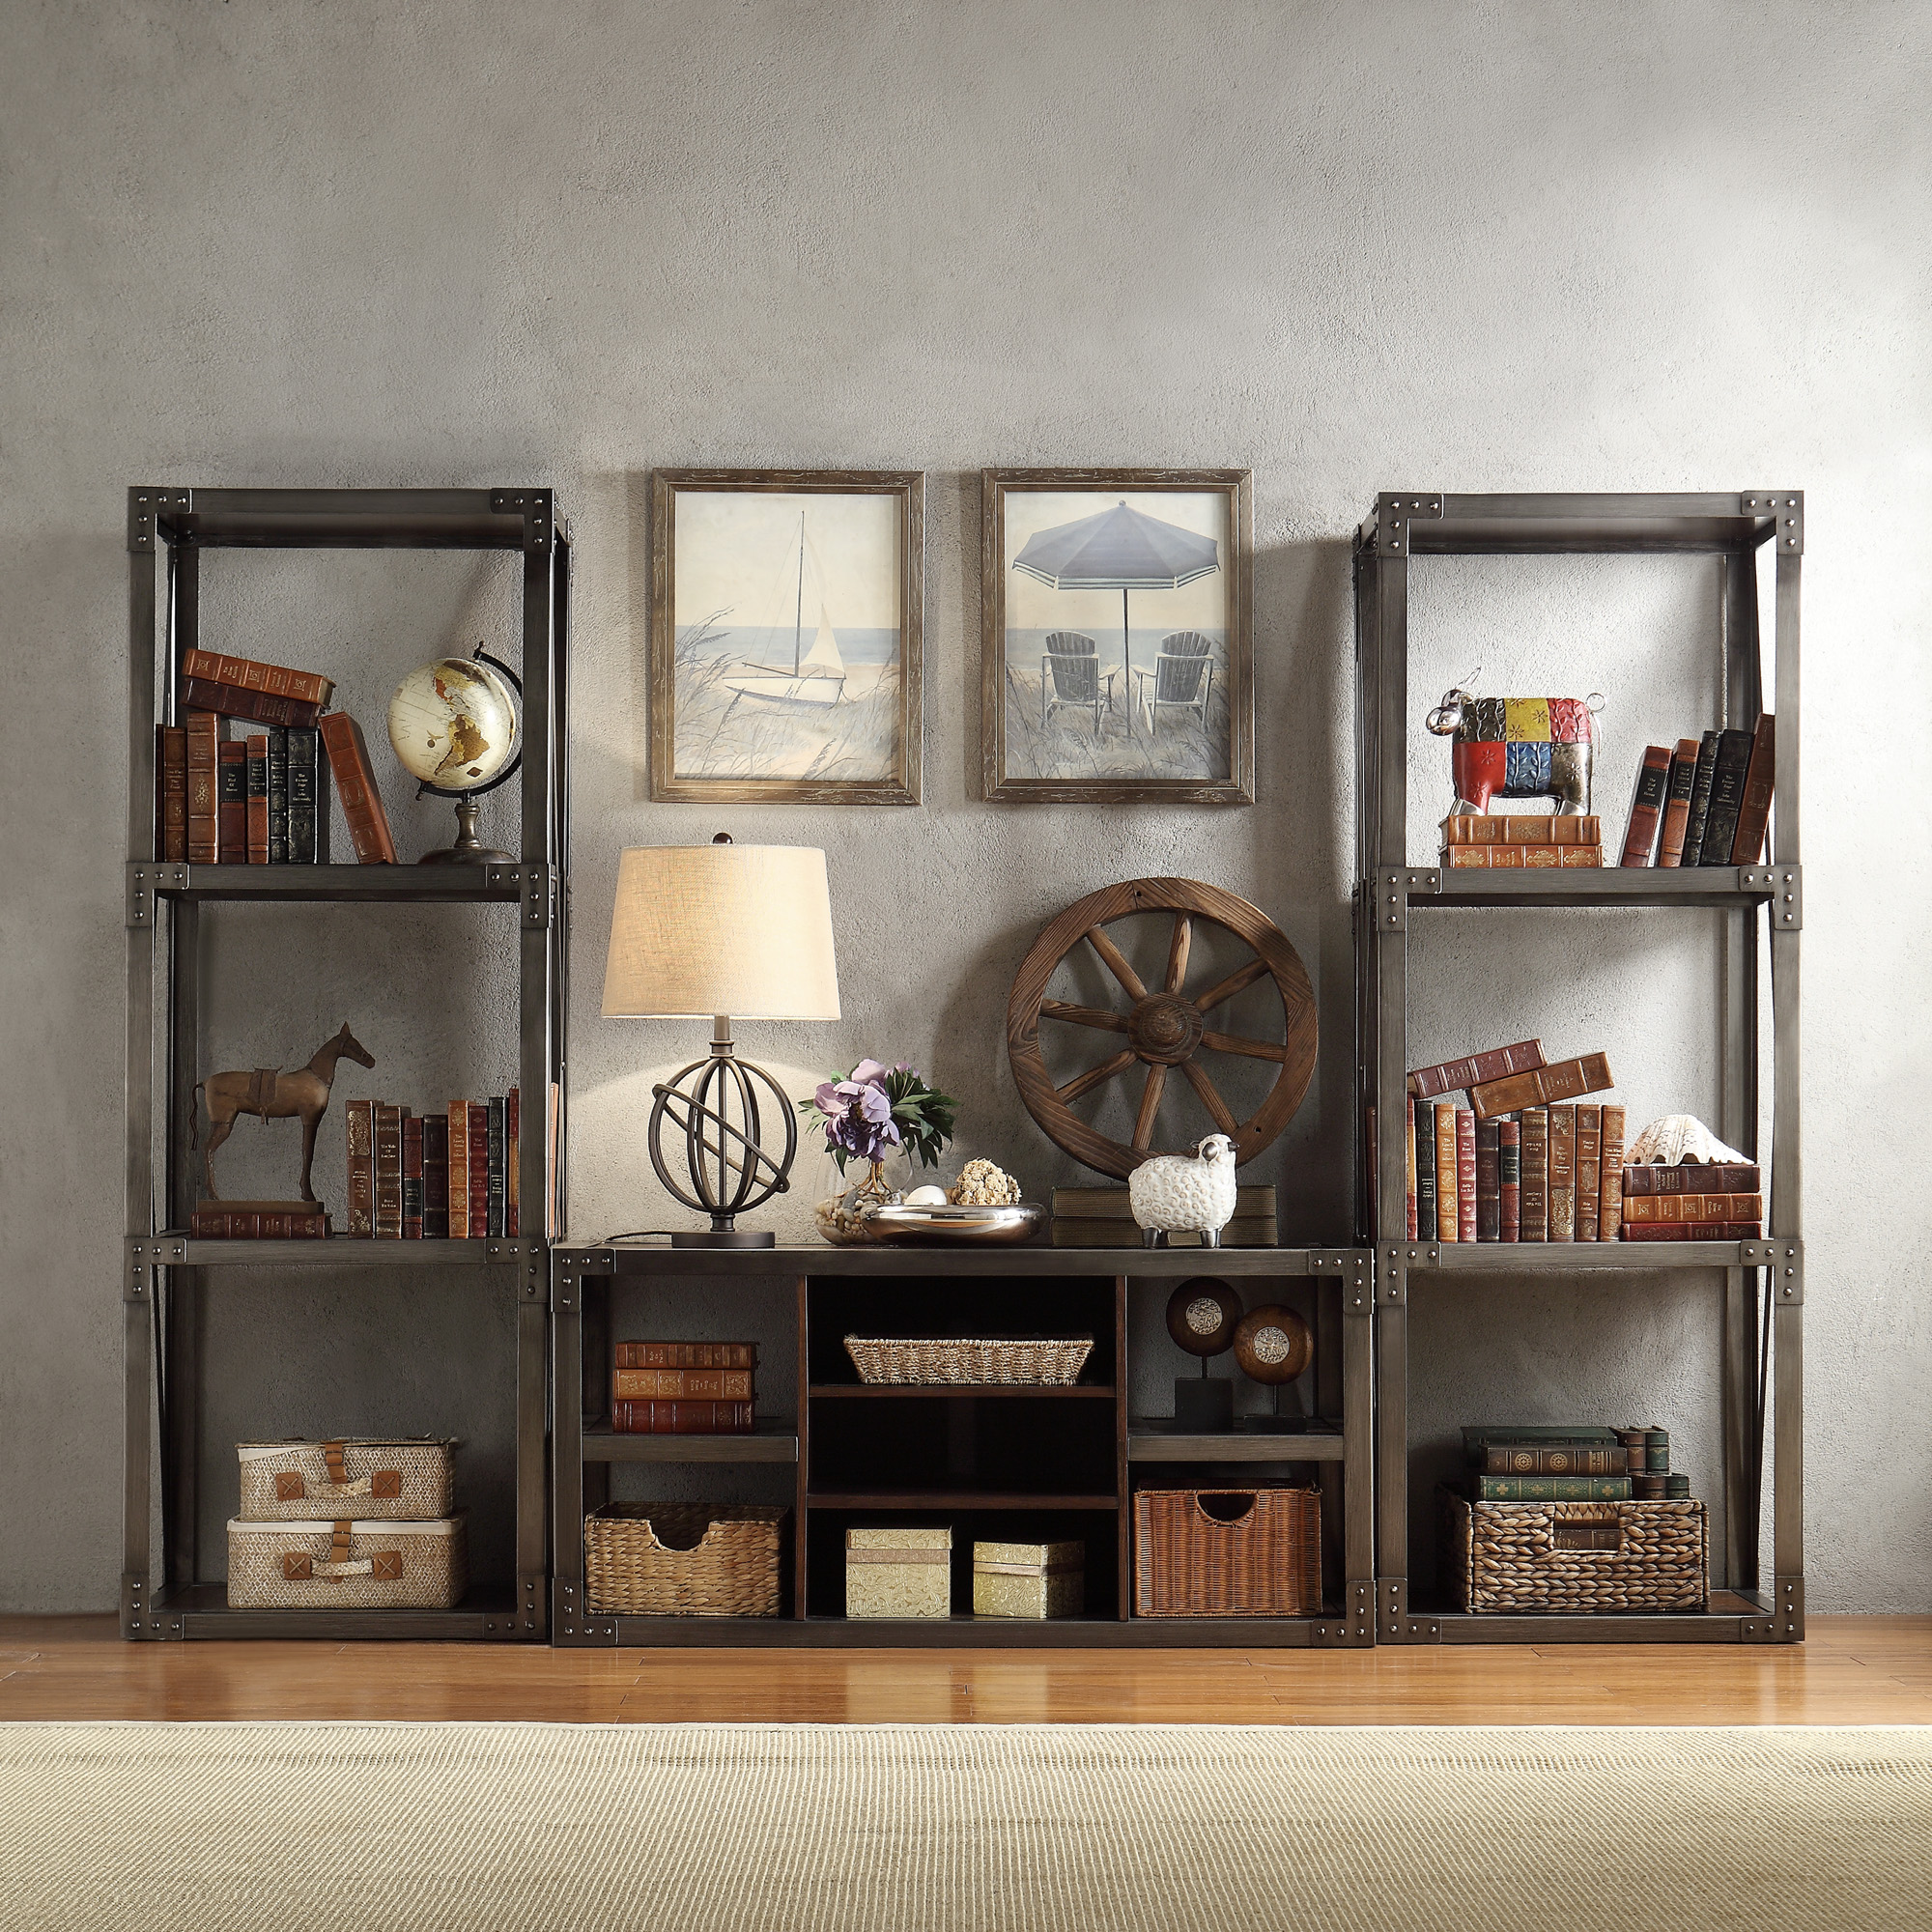 This is one of the iNSPIRE Q entertainment centers to showcase how to decorate a bookshelf. There are two bookcases and a TV stand, all crafted with metal with a distinct industrial aesthetic. The shelves are all decorated with brown books, brown baskets, and brown pieces of décor to enhance the Old World vibe.